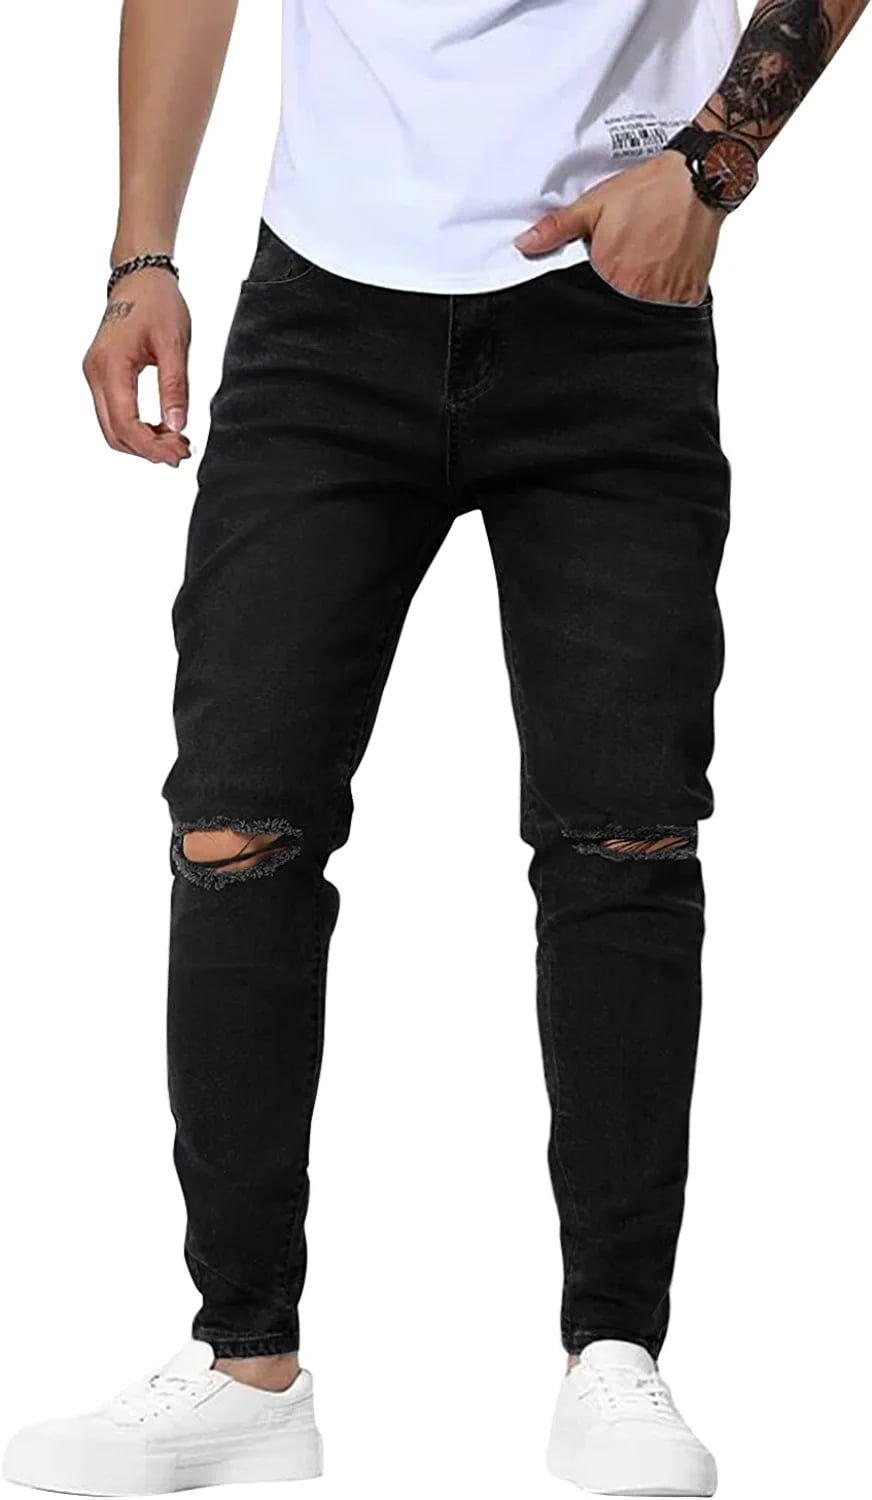 Men's Stylish Slim Fit Stained Ripped Washed Black Jeans Pants #stylishsmen  #pants #rippedjeans #jeans #…